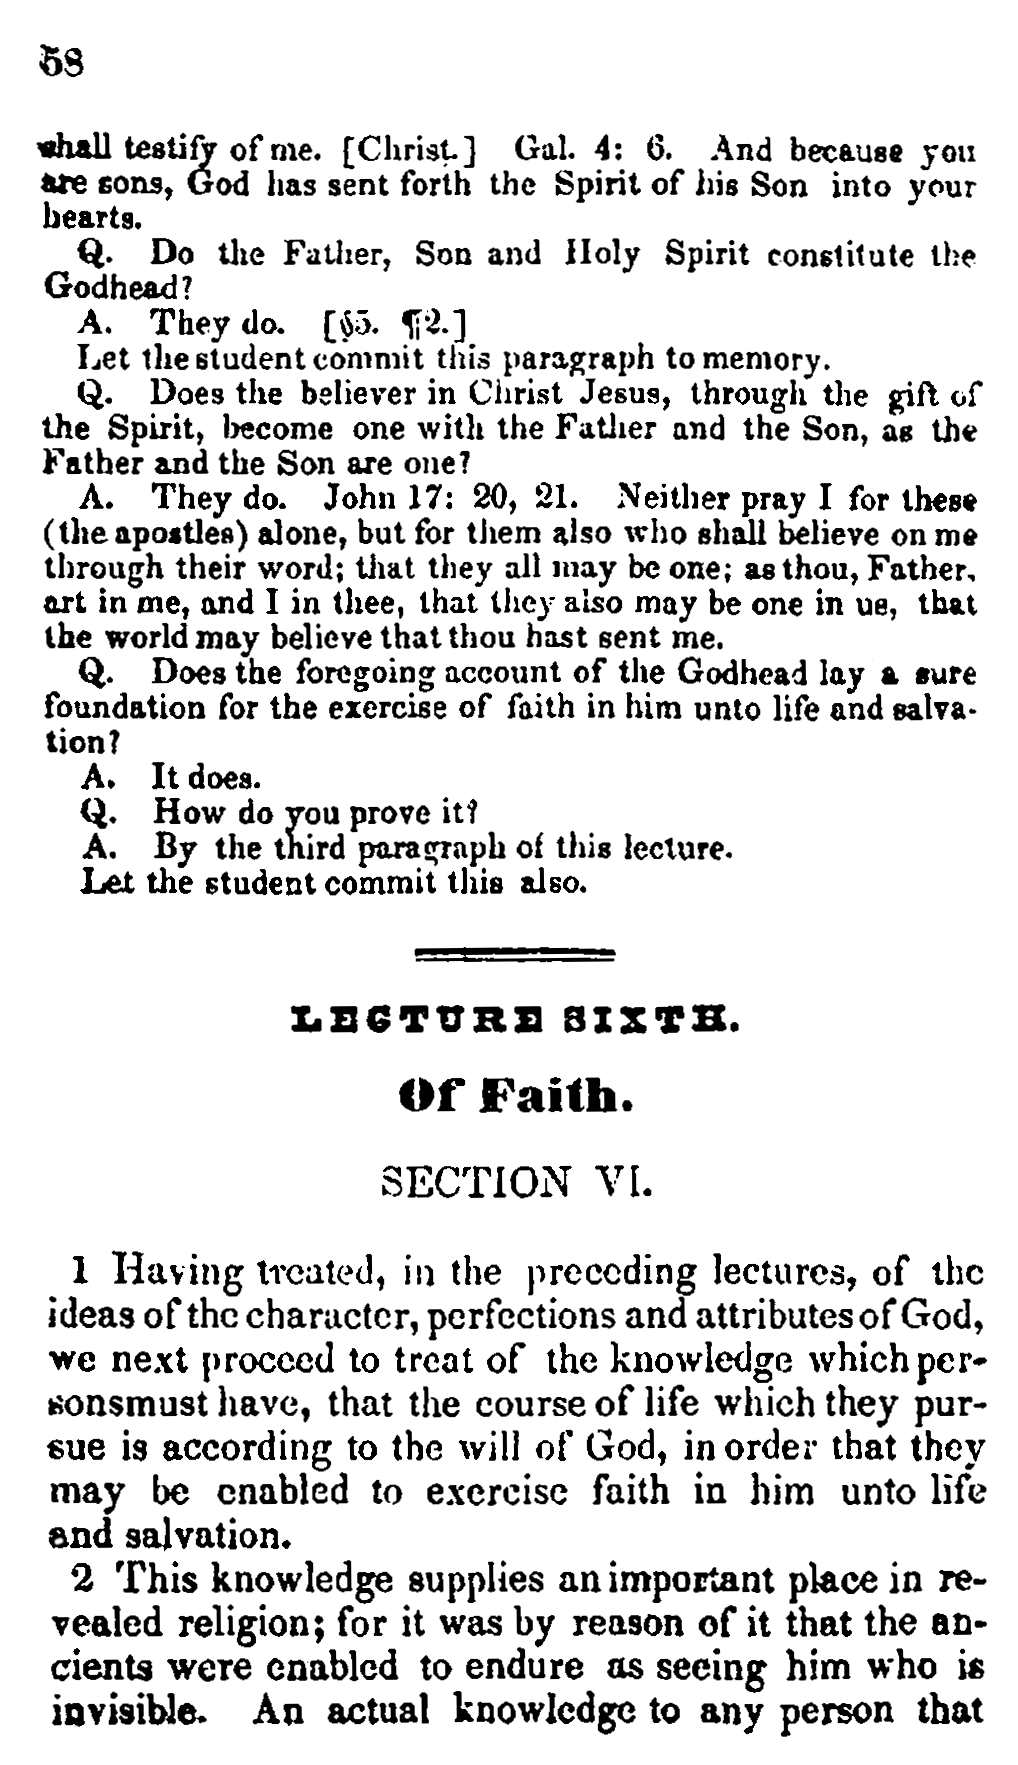 1835 Doctrine & Covenants - Lectures on Faith, p. 58